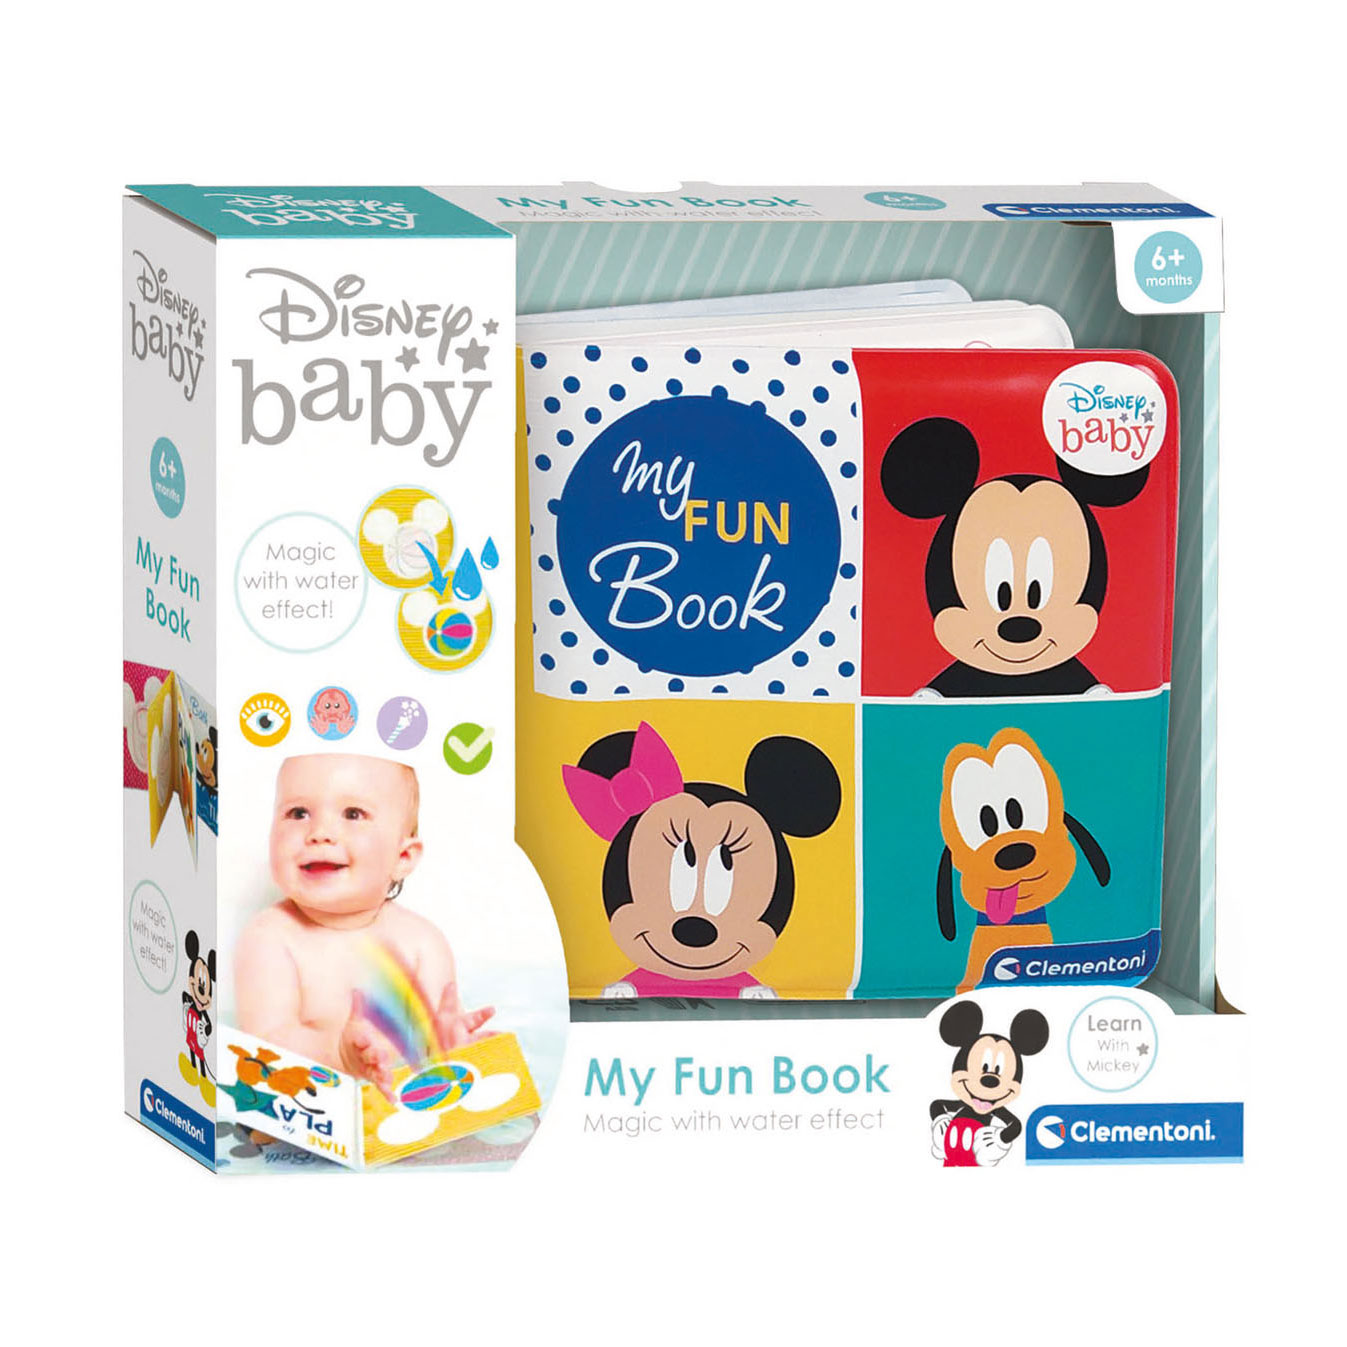 Clementoni CLEMENTONI Disney Baby My Fun Book Book for early childhood 